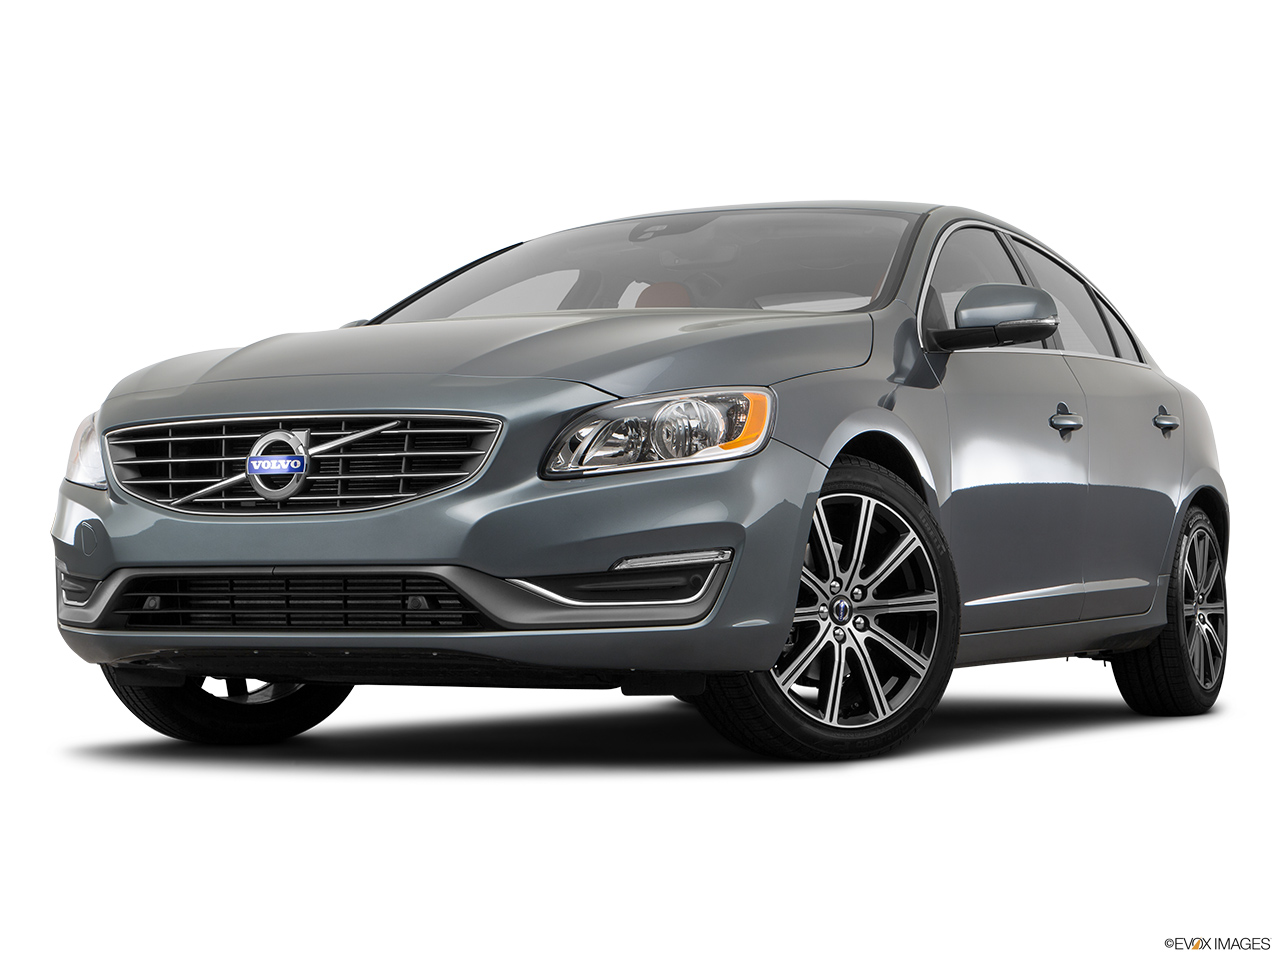 2018 Volvo S60 T5 Inscription Front angle view, low wide perspective. 